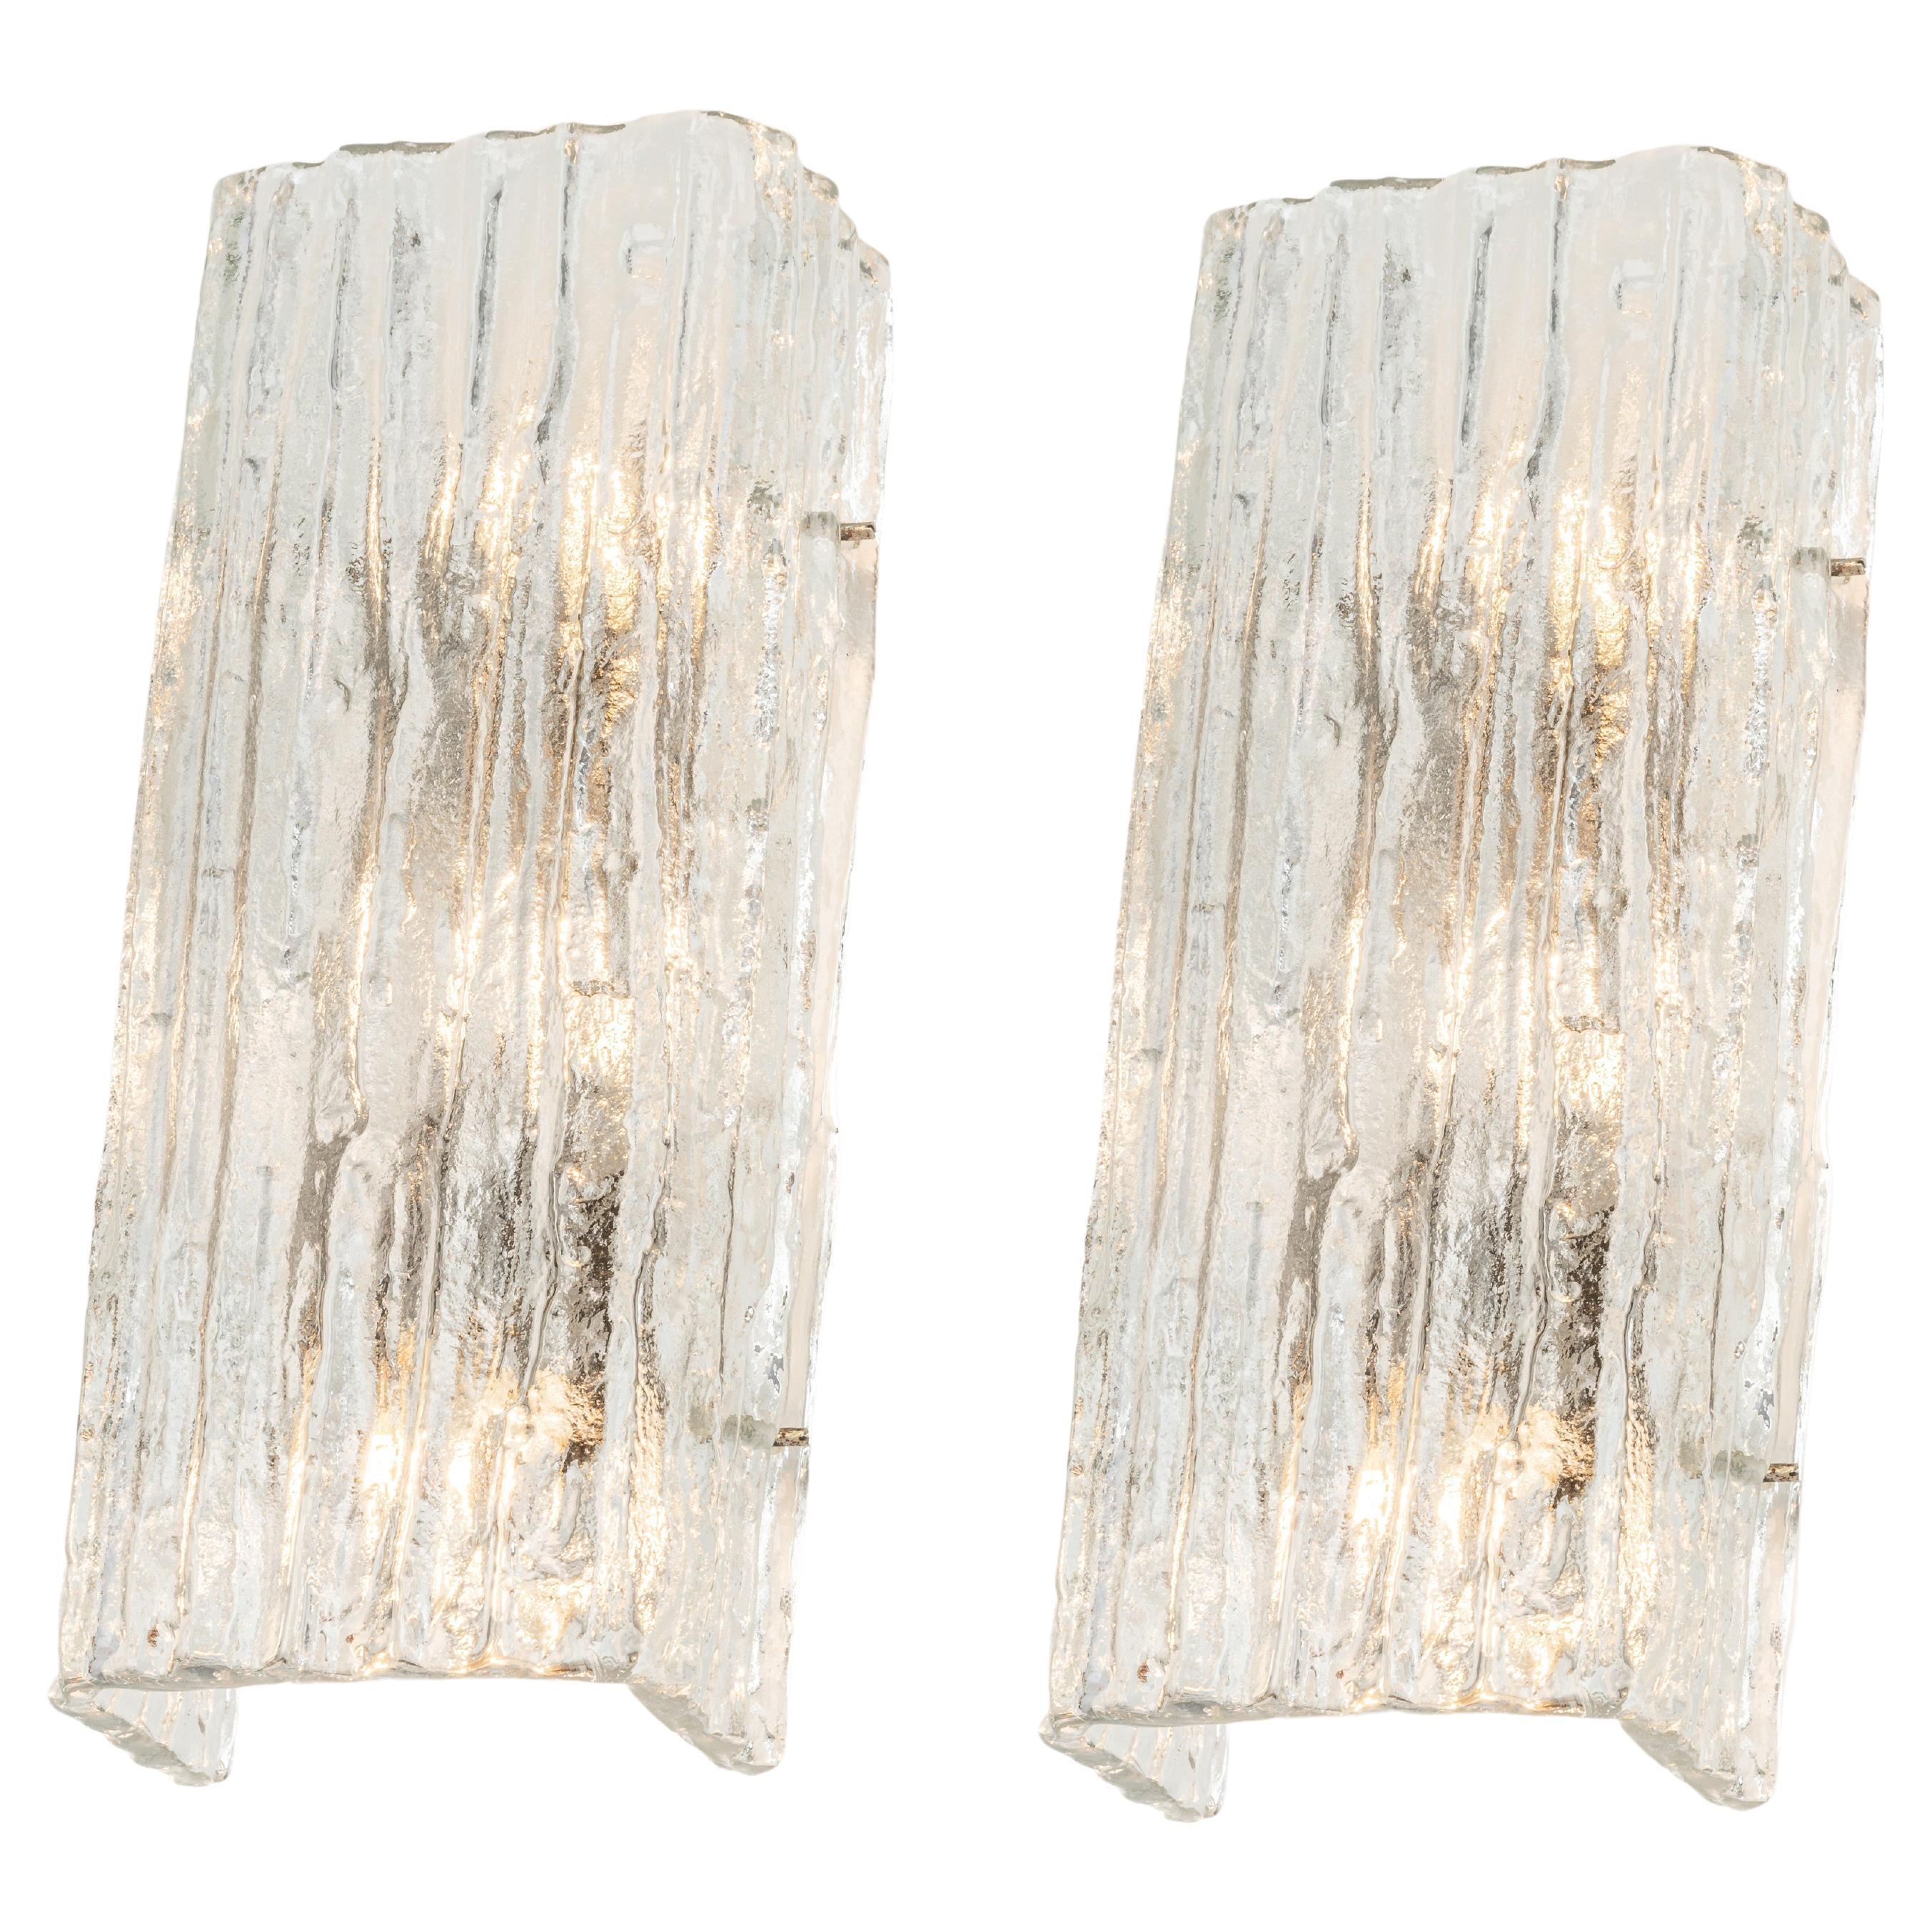 1 of 3 Pairs of Kalmar Sconces Wall Lights, Austria, 1960s For Sale